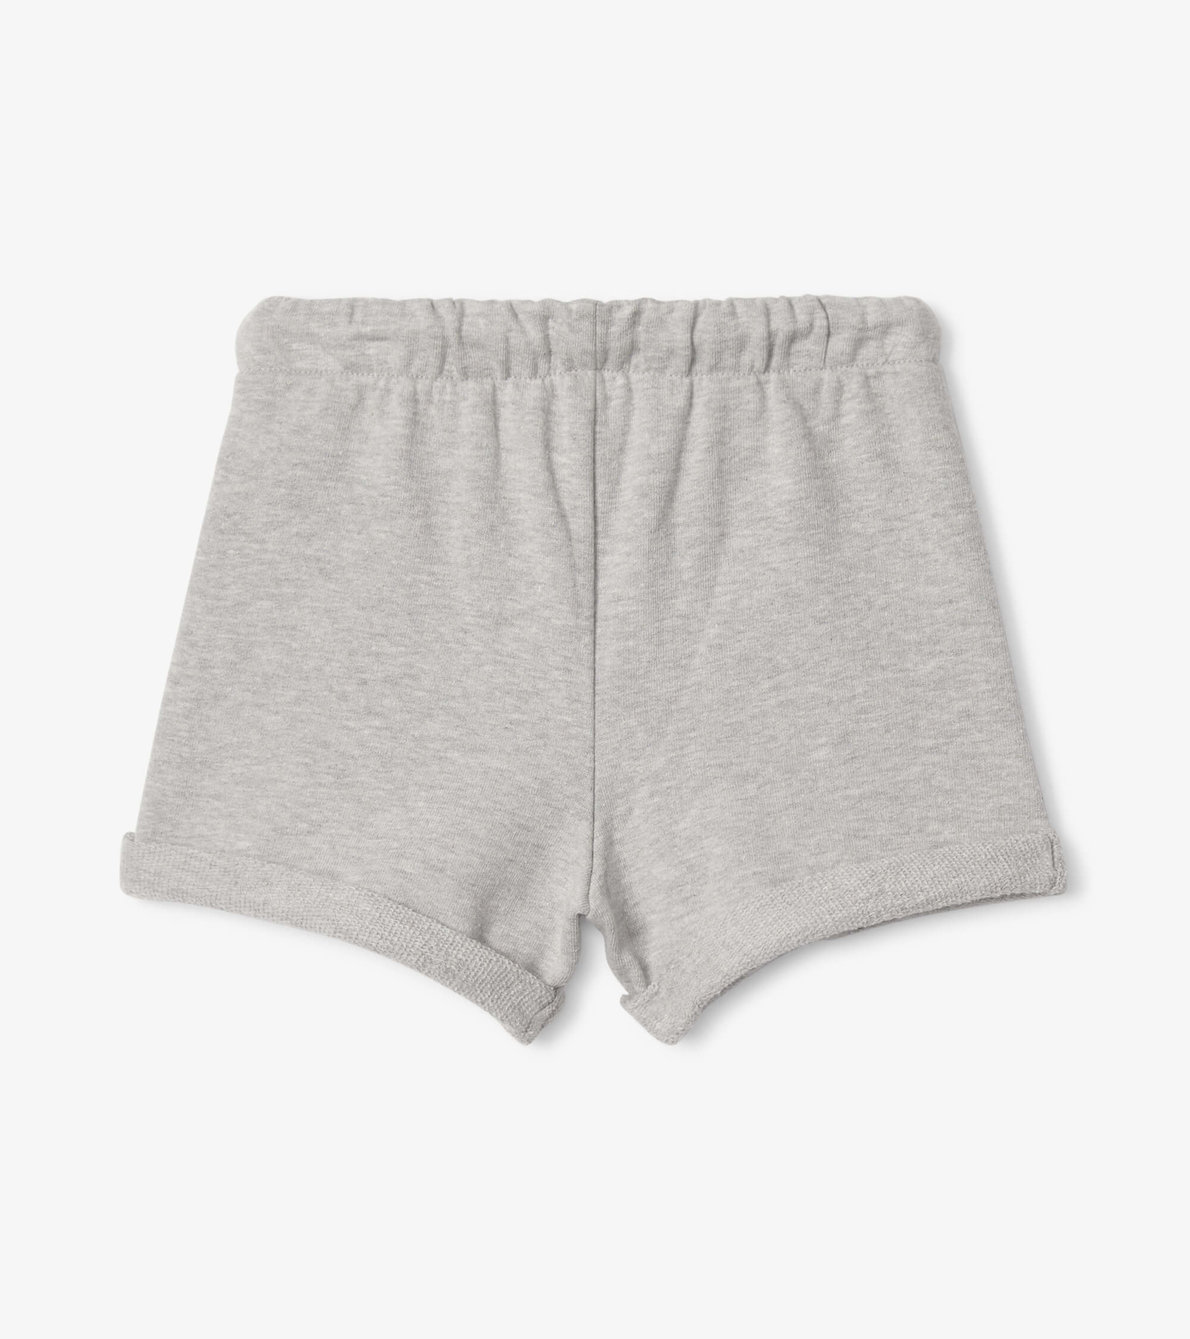 View larger image of Athletic Grey Toddler Pull On Shorts